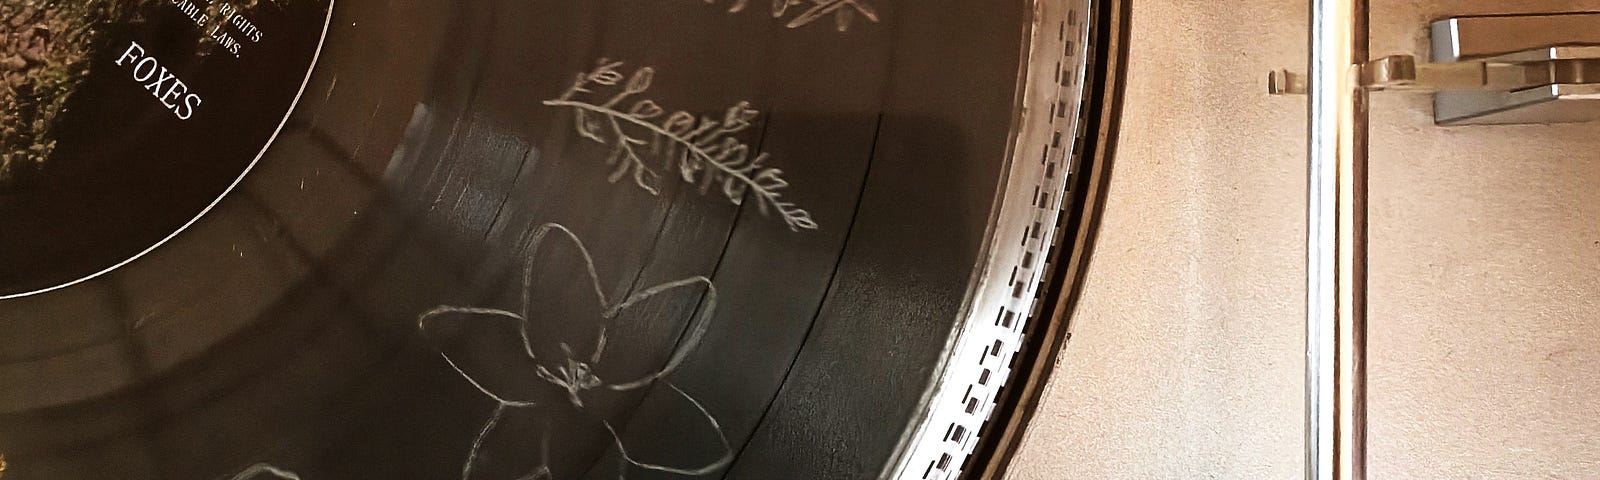 A section of a vinyl record on a silver turntable has outlines of flowers etched into the surface.